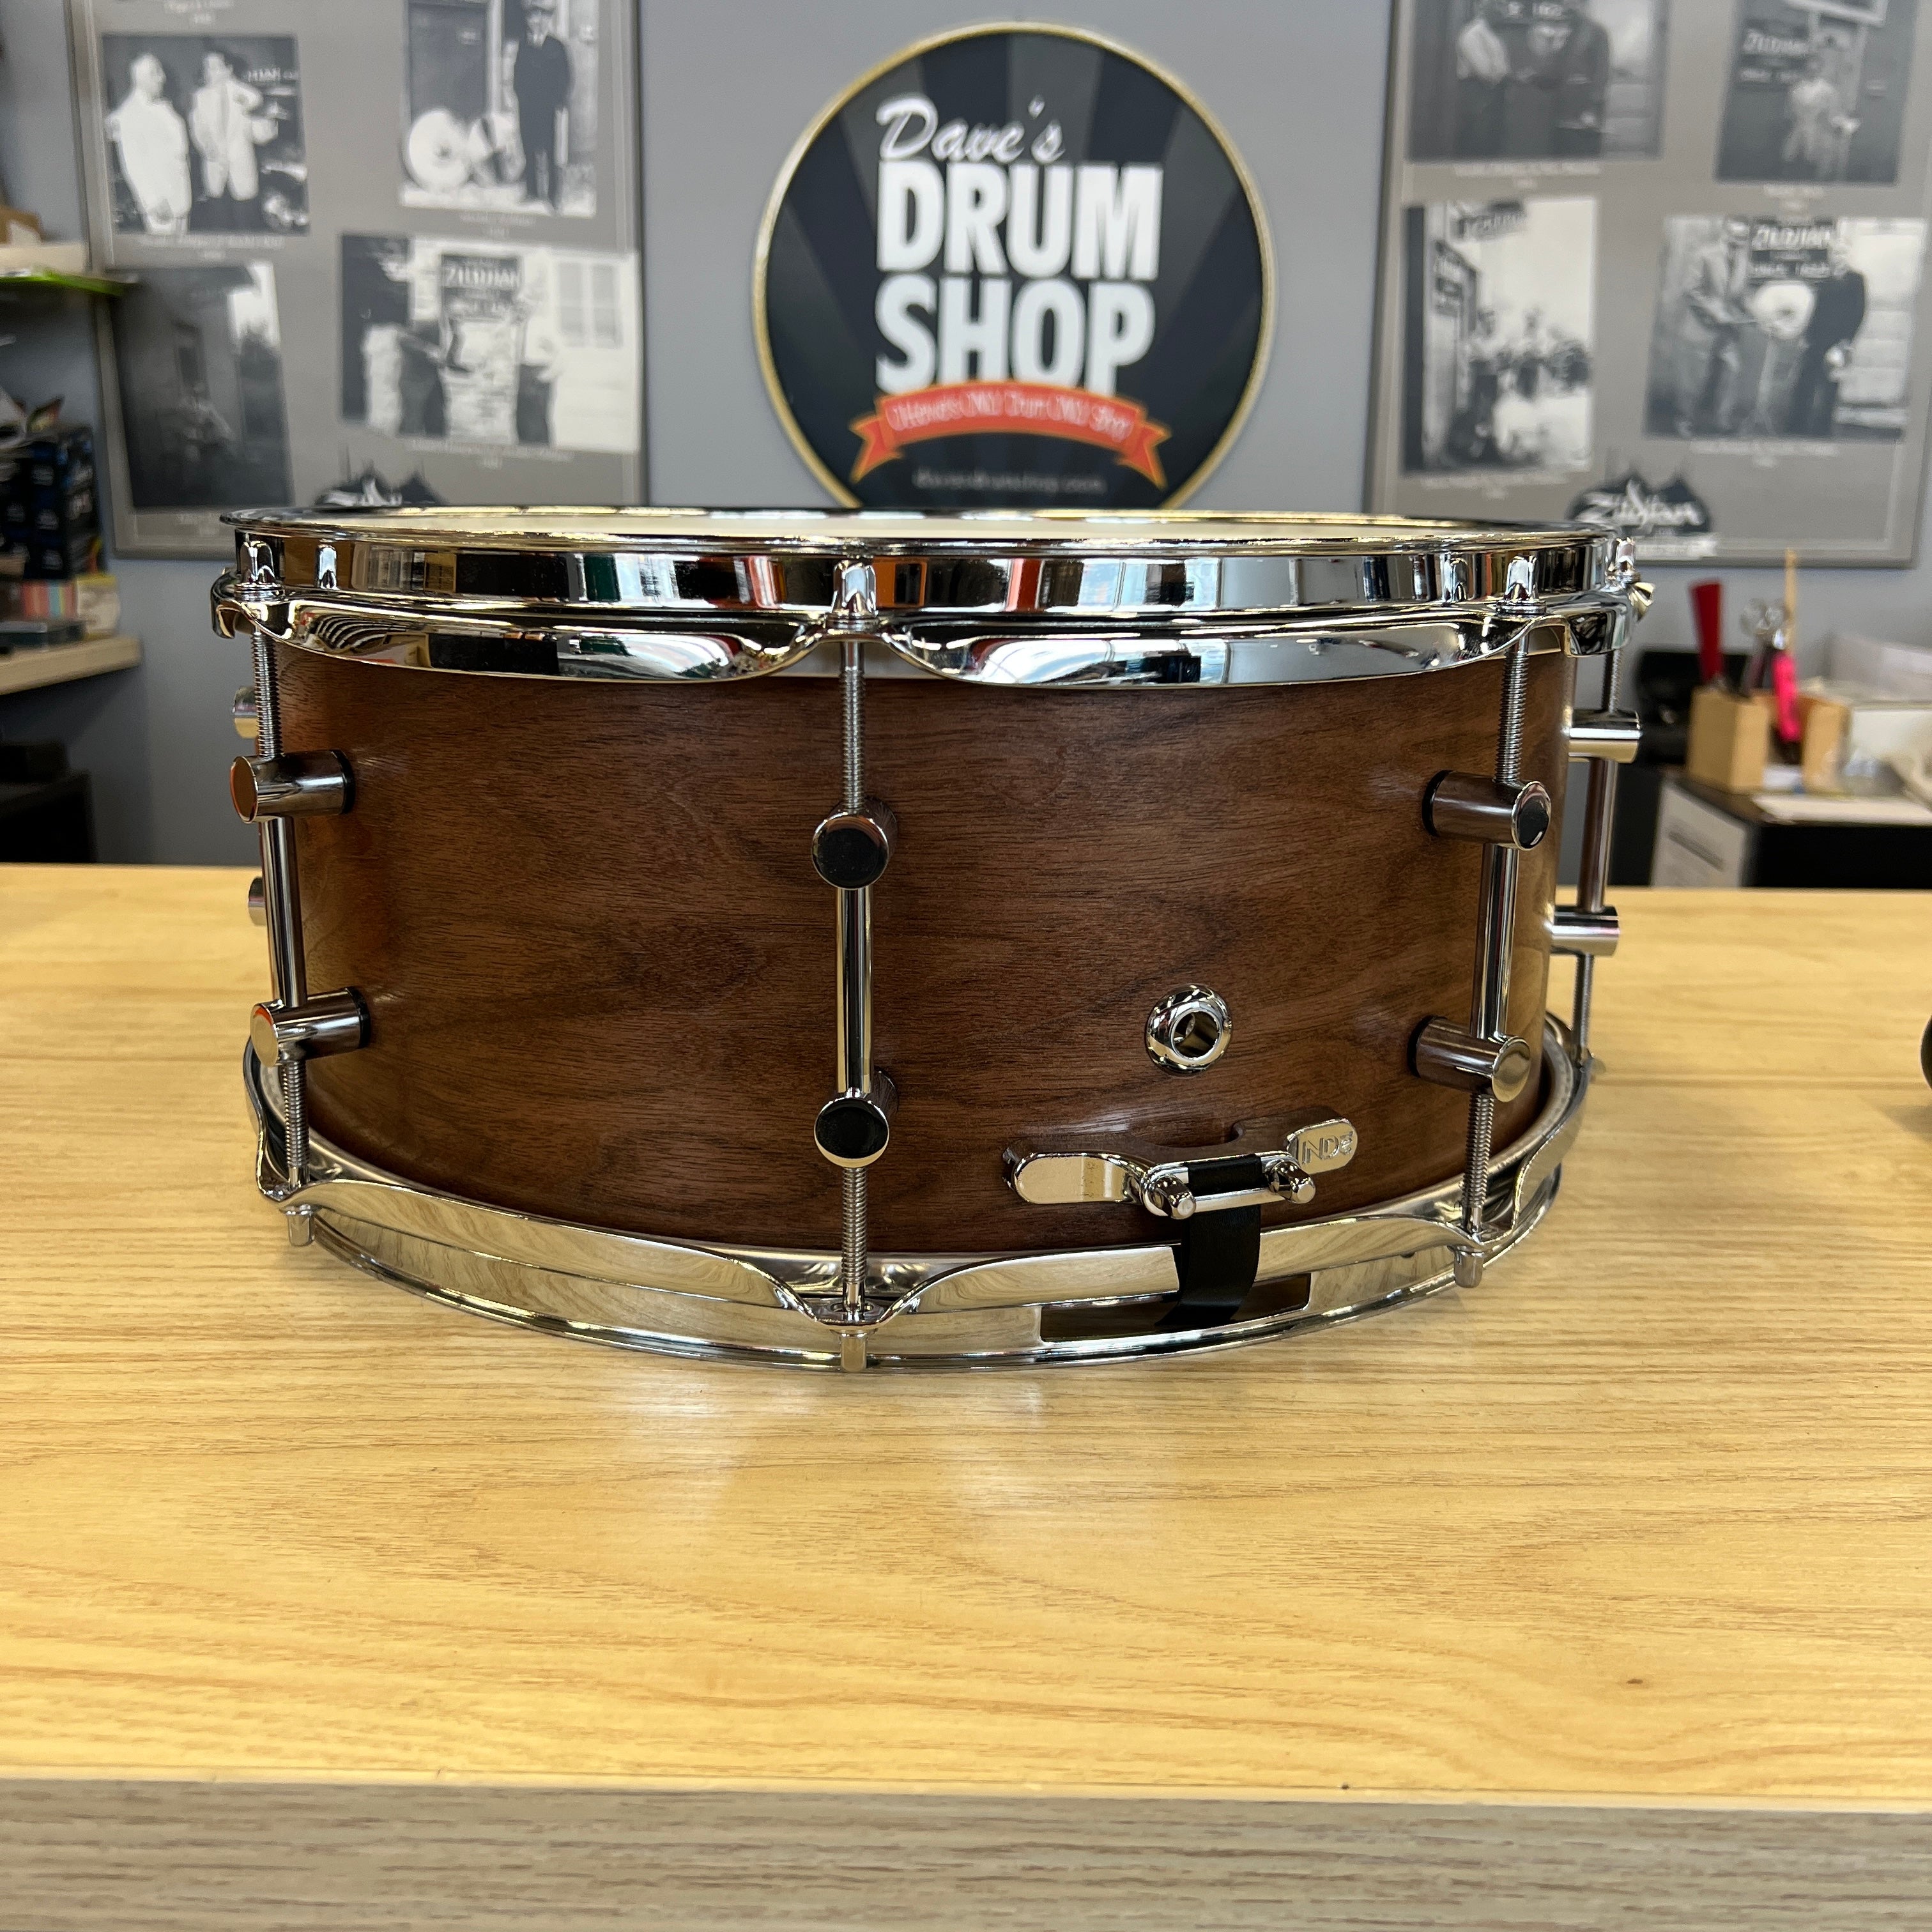 Dave's Limited Edition Snares for Charity Walnut drum kit Dave's Drum Shop 